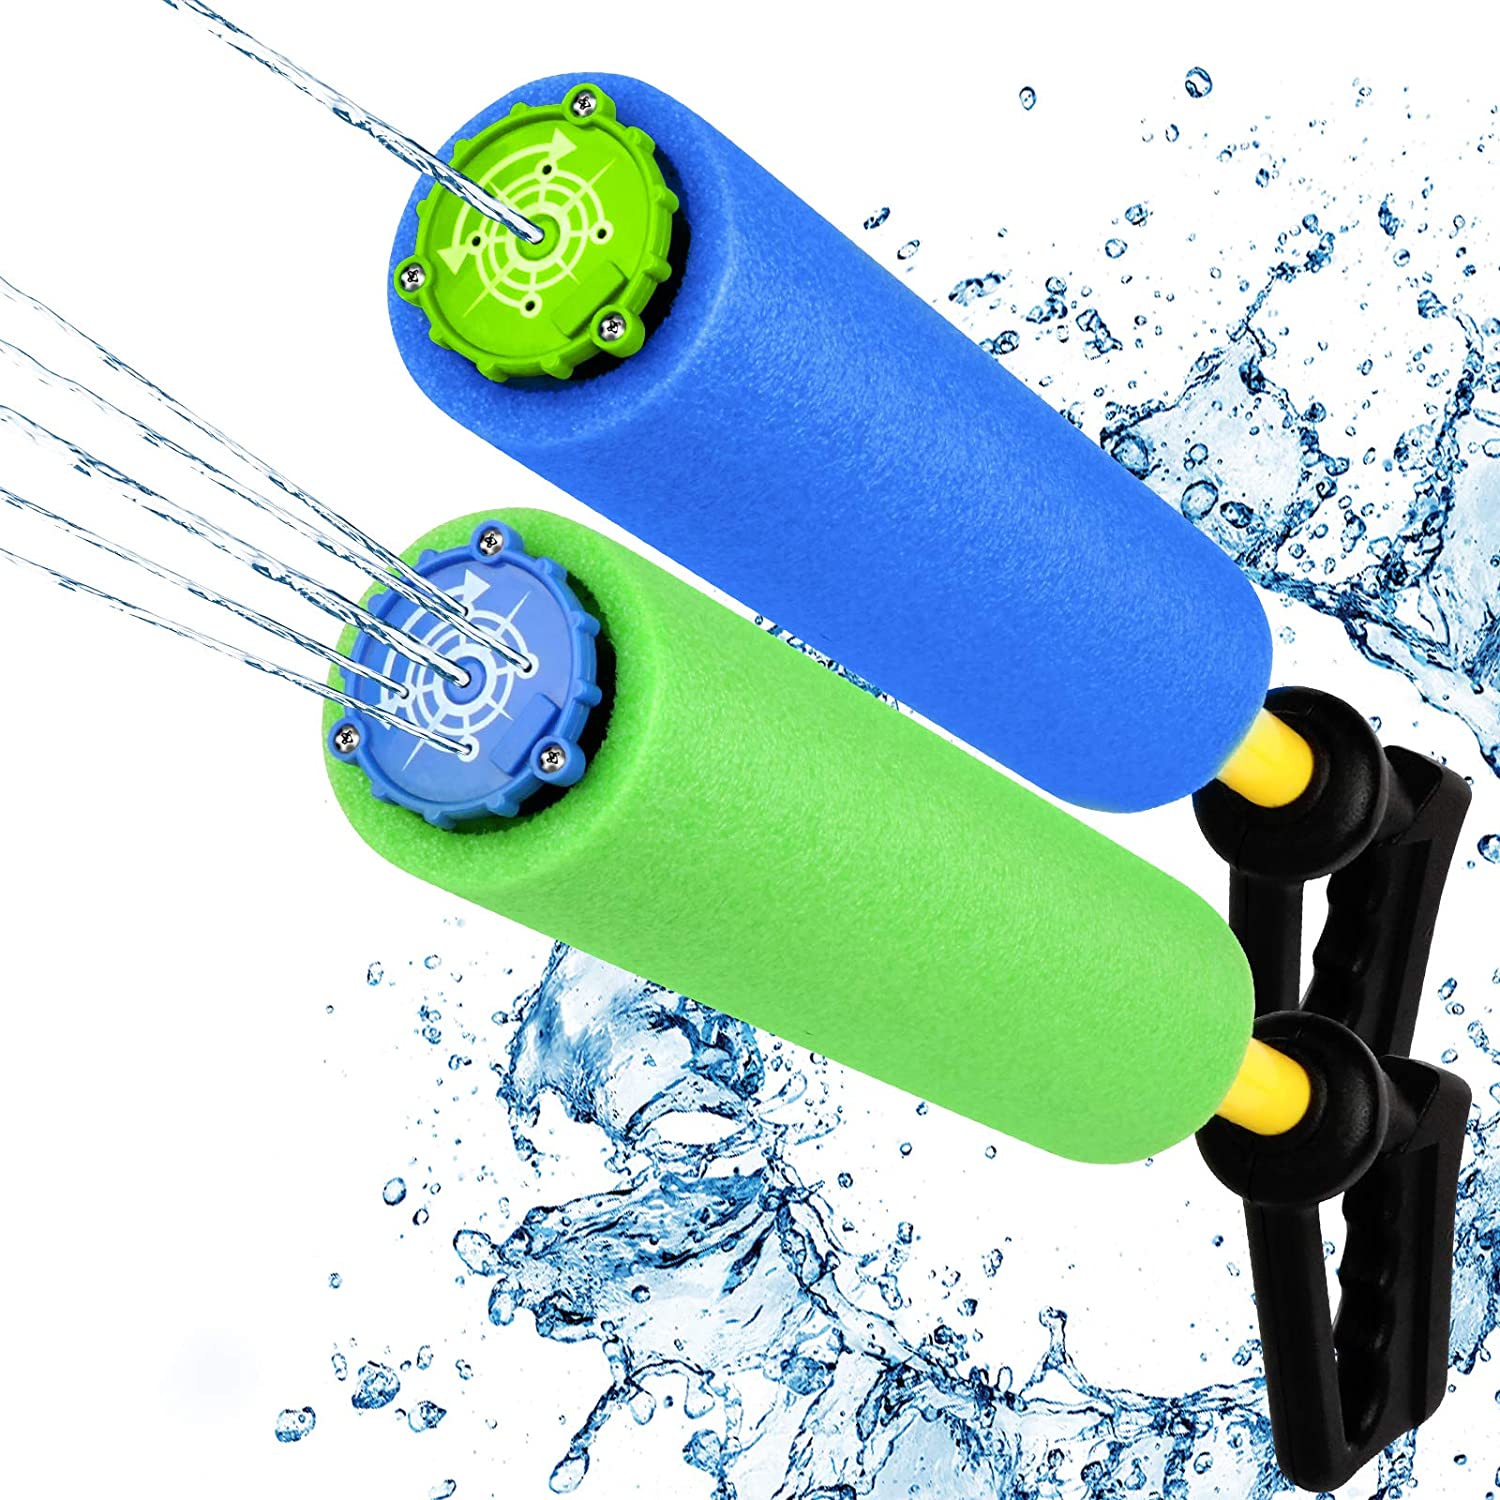 Water Blaster Soaker Gun, 2 Pack Squirt Water Toy for Children & Adults - Two Switchable Squirt Mode with 5 Water Spout for More Fun in Pool, Beach etc. 2 Bright Colors Up to 33 Ft Blast.